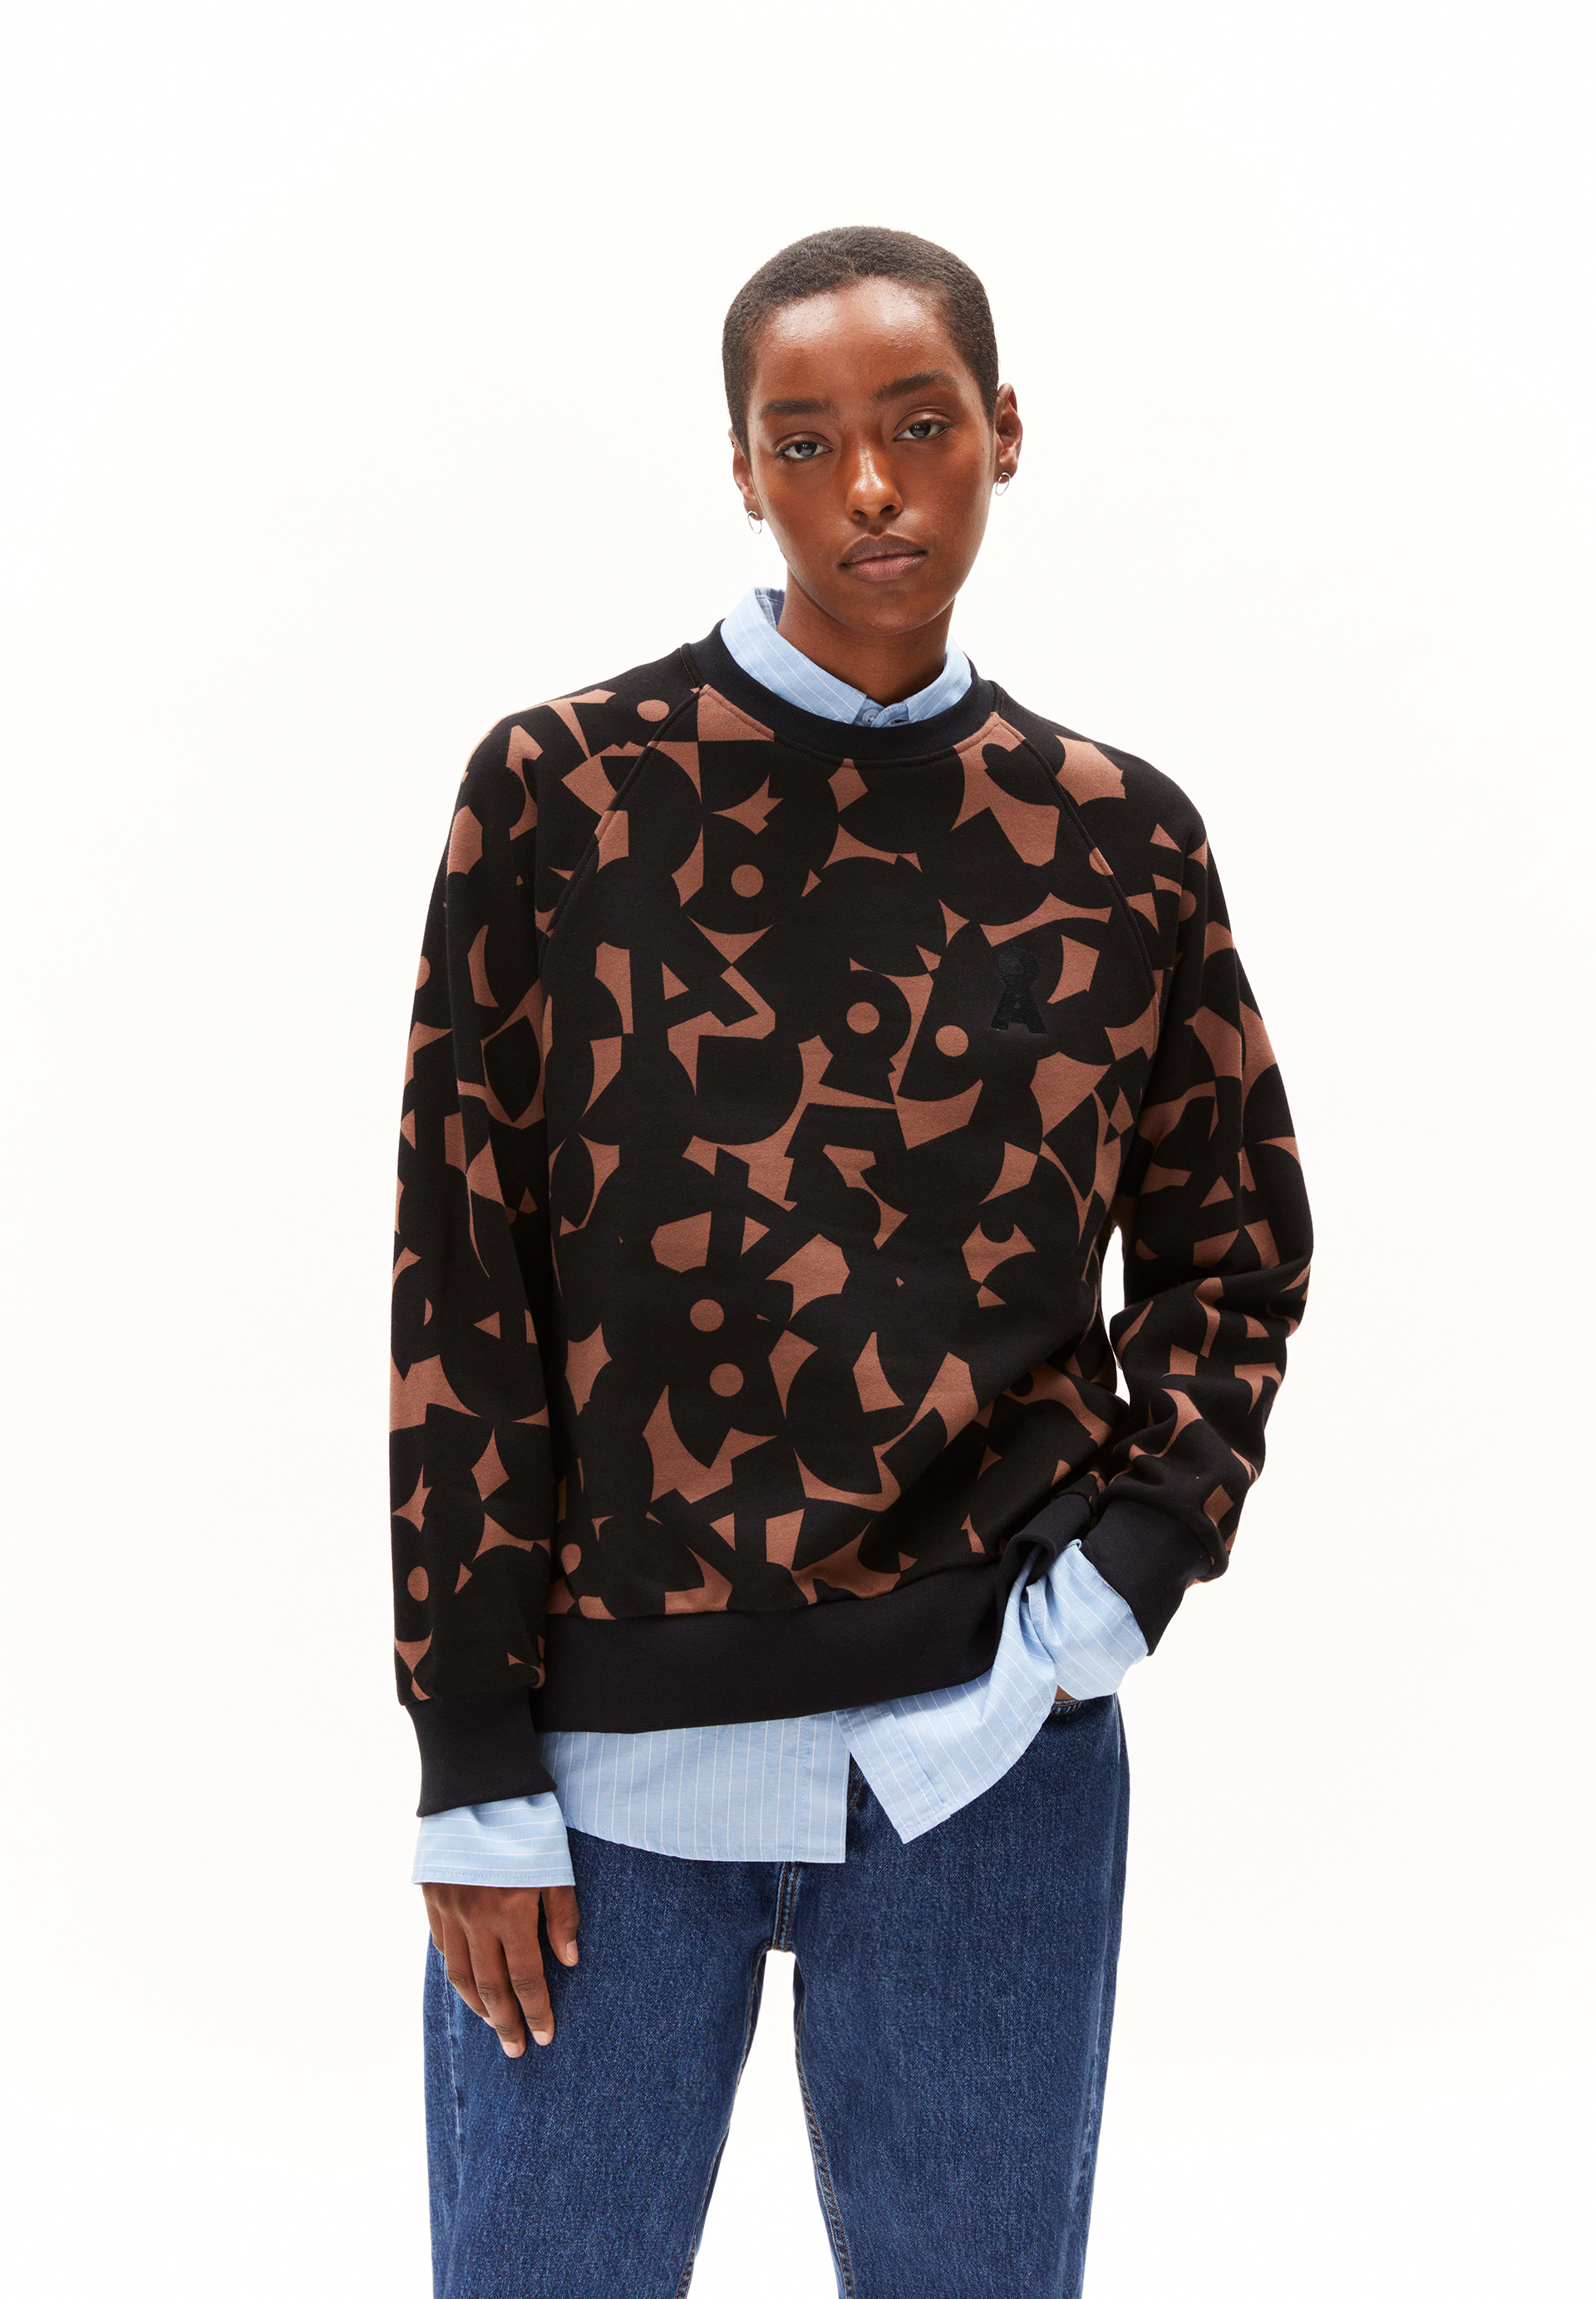 GIOVANNAA ABSTRACT A Sweatshirt Oversized Fit made of Organic Cotton